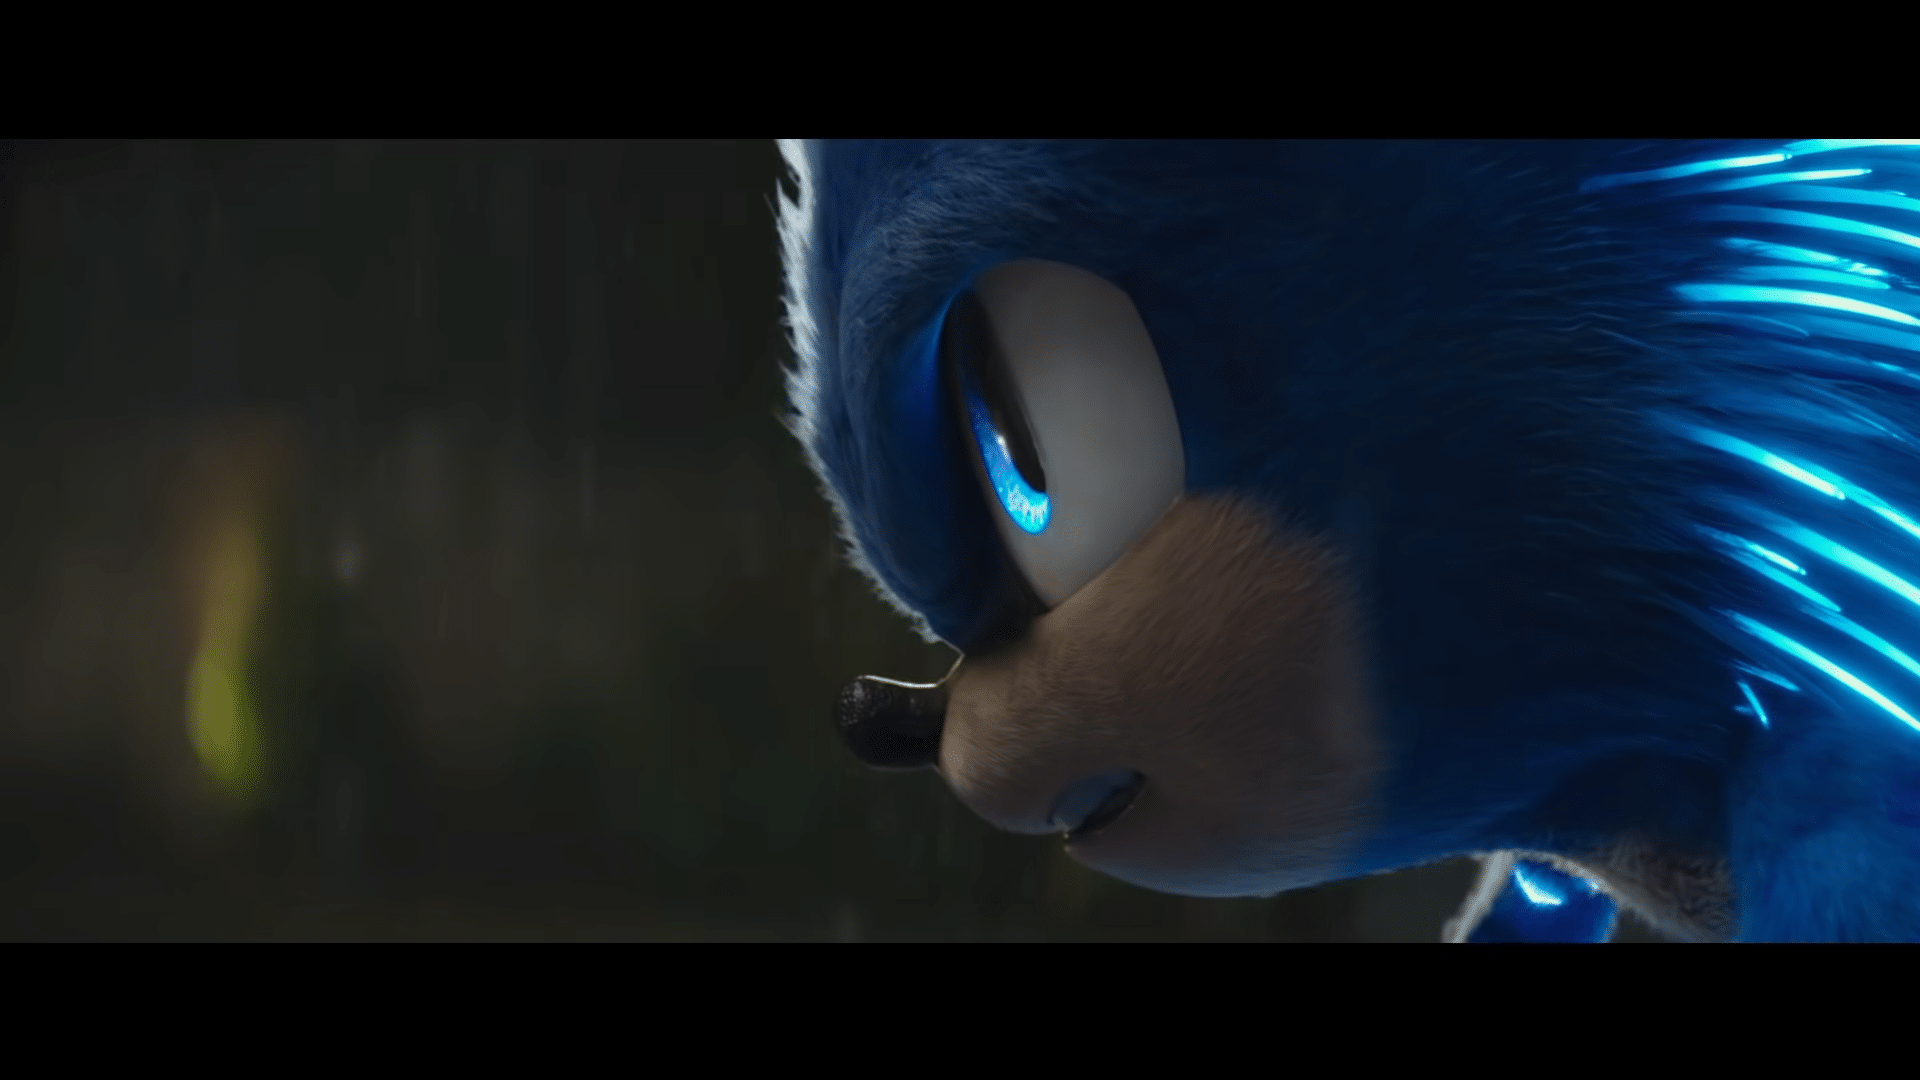 Sonic The Hedgehog 2 – First Trailer